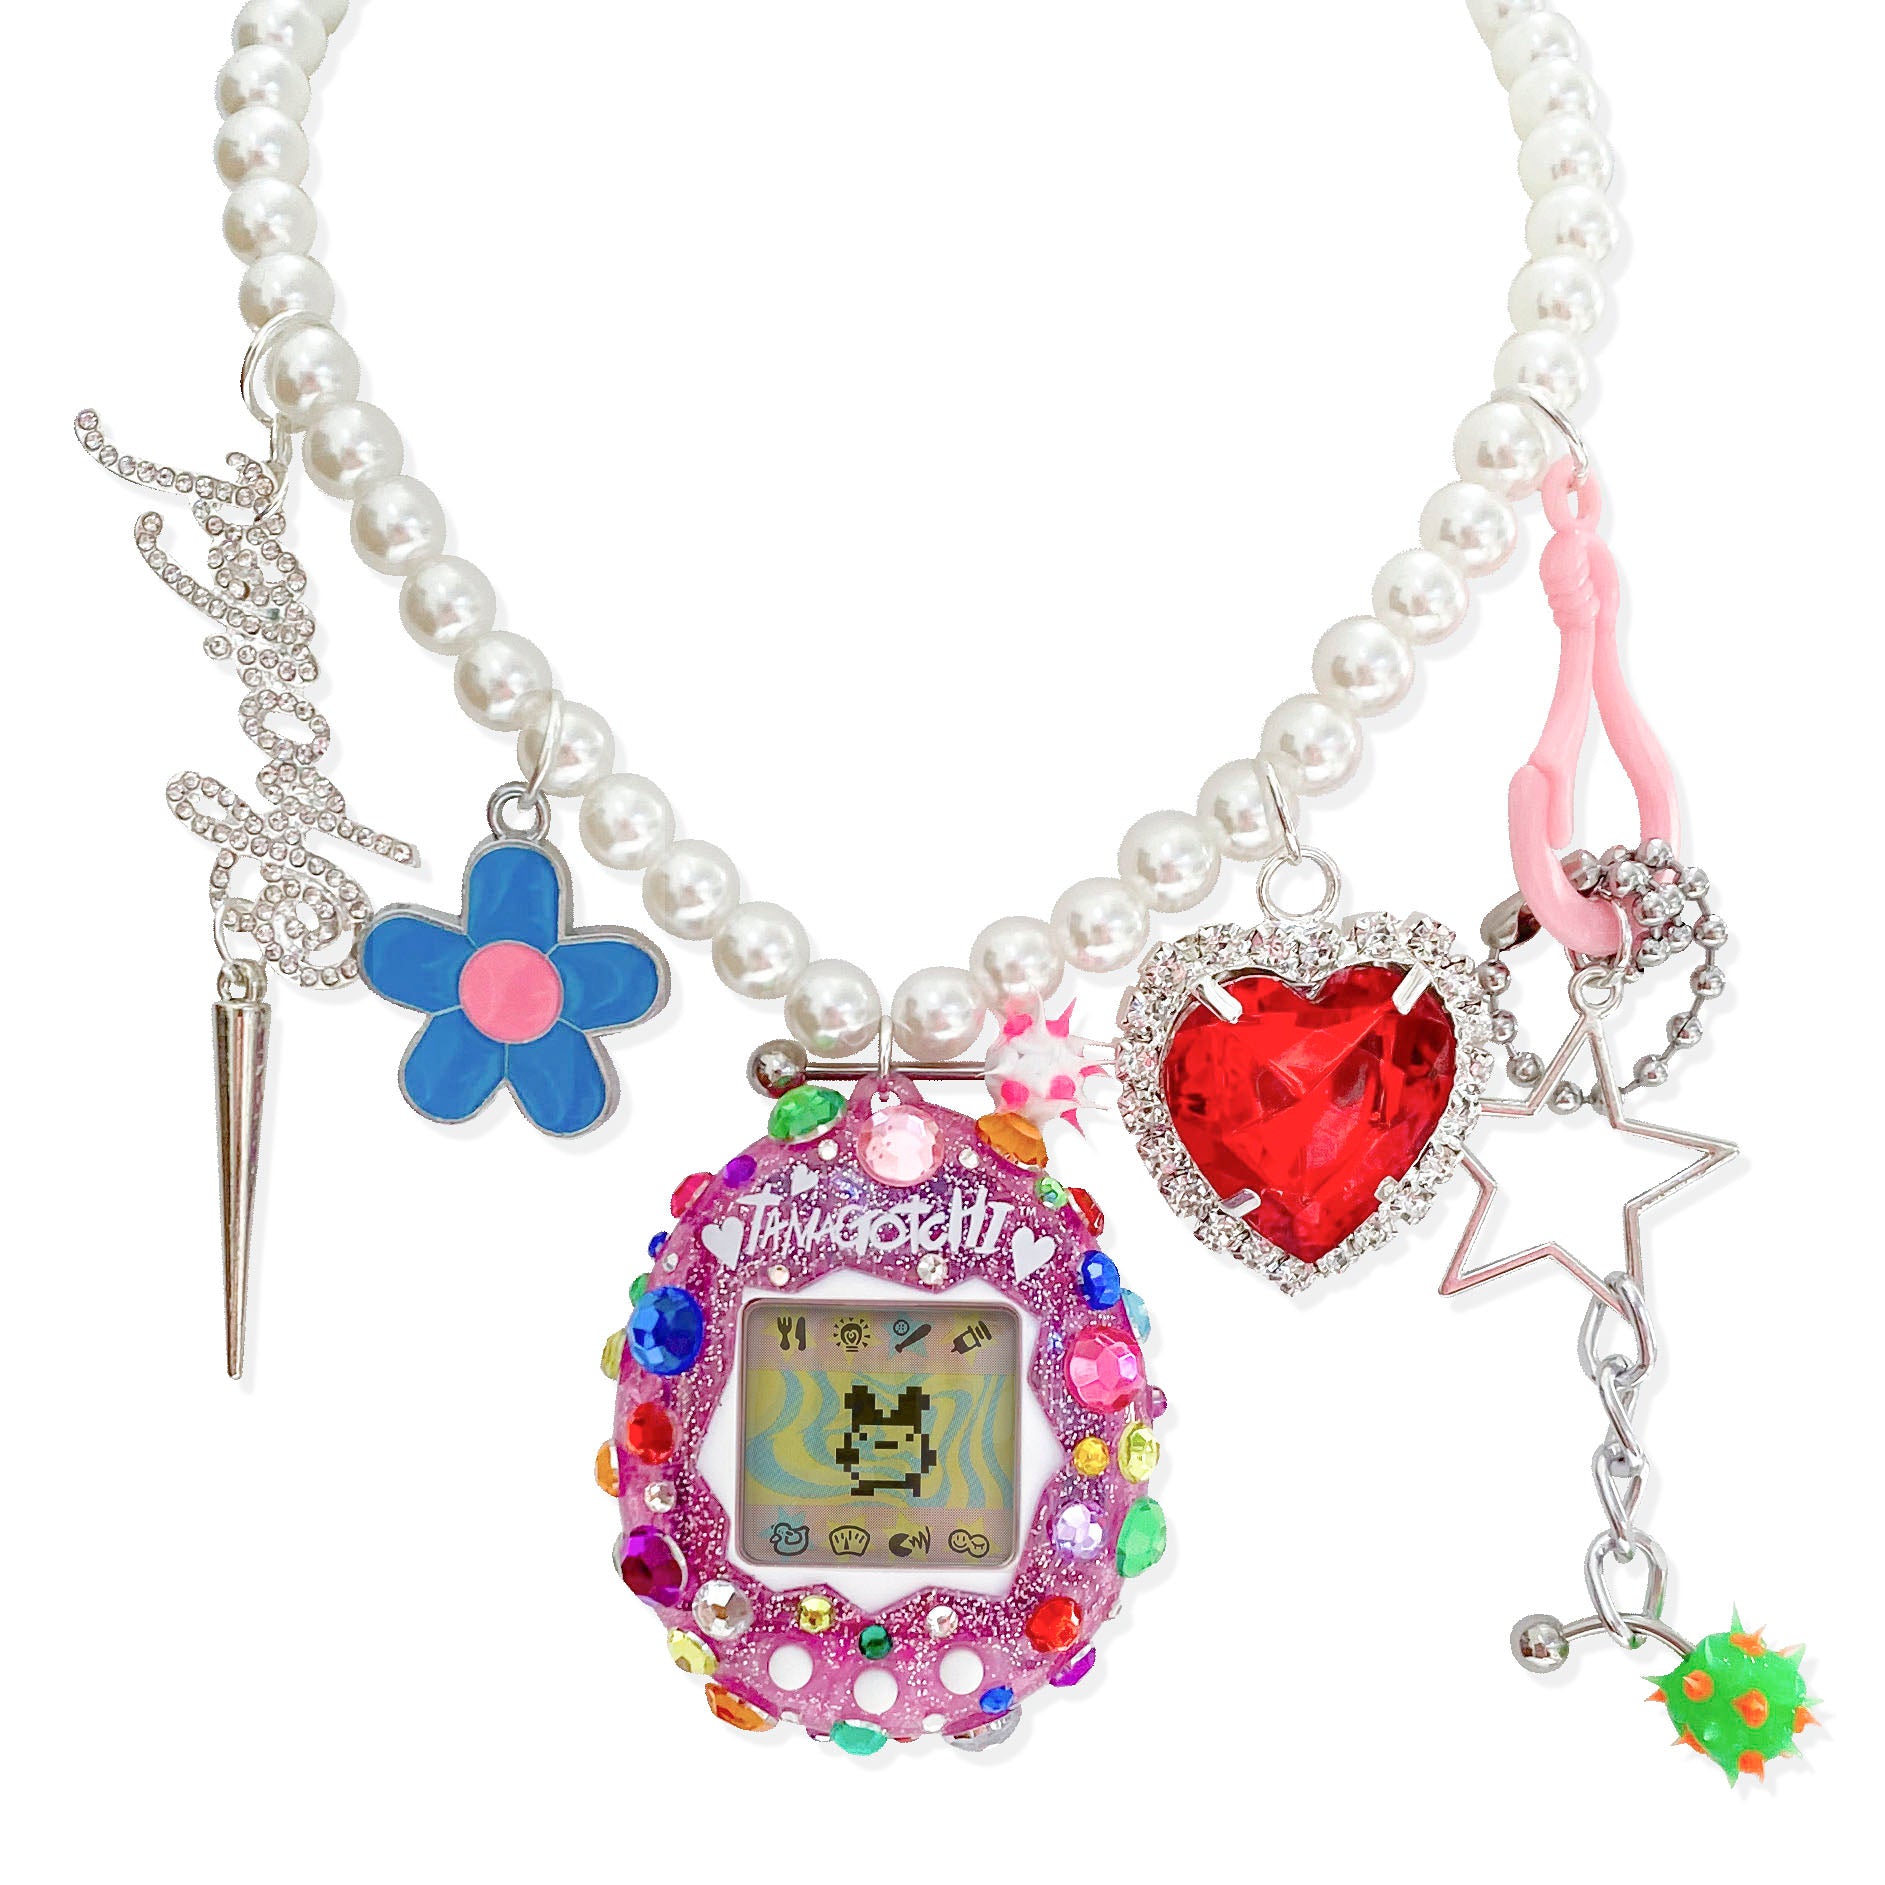 Bedazzled Pink Glitter Tamagotchi Charm  Necklace